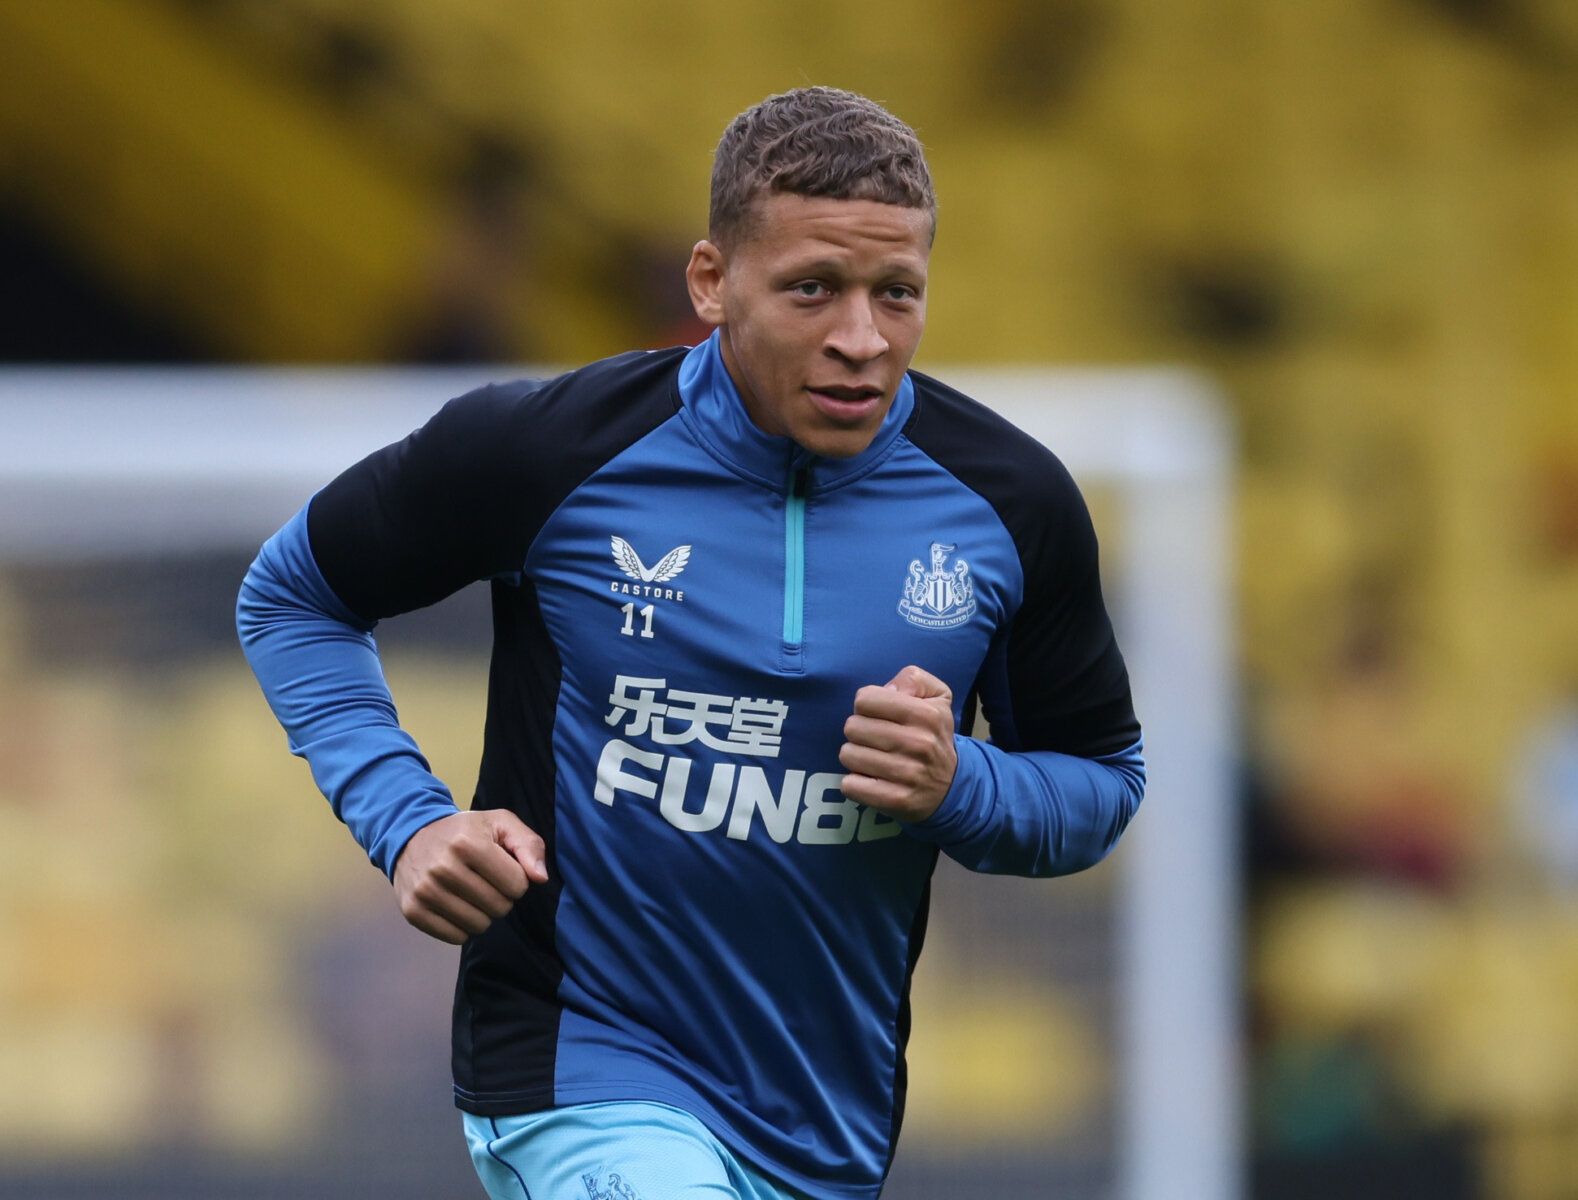 Soccer Football - Premier League - Watford v Newcastle United - Vicarage Road, Watford, Britain - September 25, 2021 Newcastle United's Dwight Gayle during the warm up before the match REUTERS/David Klein EDITORIAL USE ONLY. No use with unauthorized audio, video, data, fixture lists, club/league logos or 'live' services. Online in-match use limited to 75 images, no video emulation. No use in betting, games or single club /league/player publications.  Please contact your account representative fo